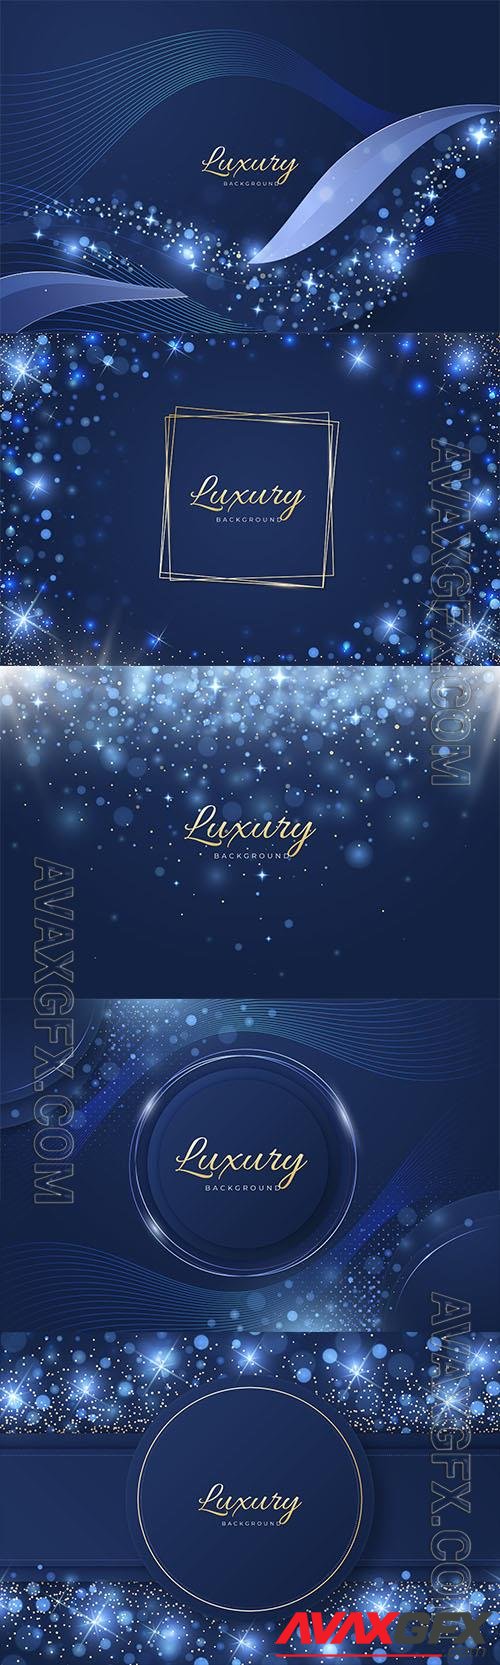 Vector realistic navy blue glitter background